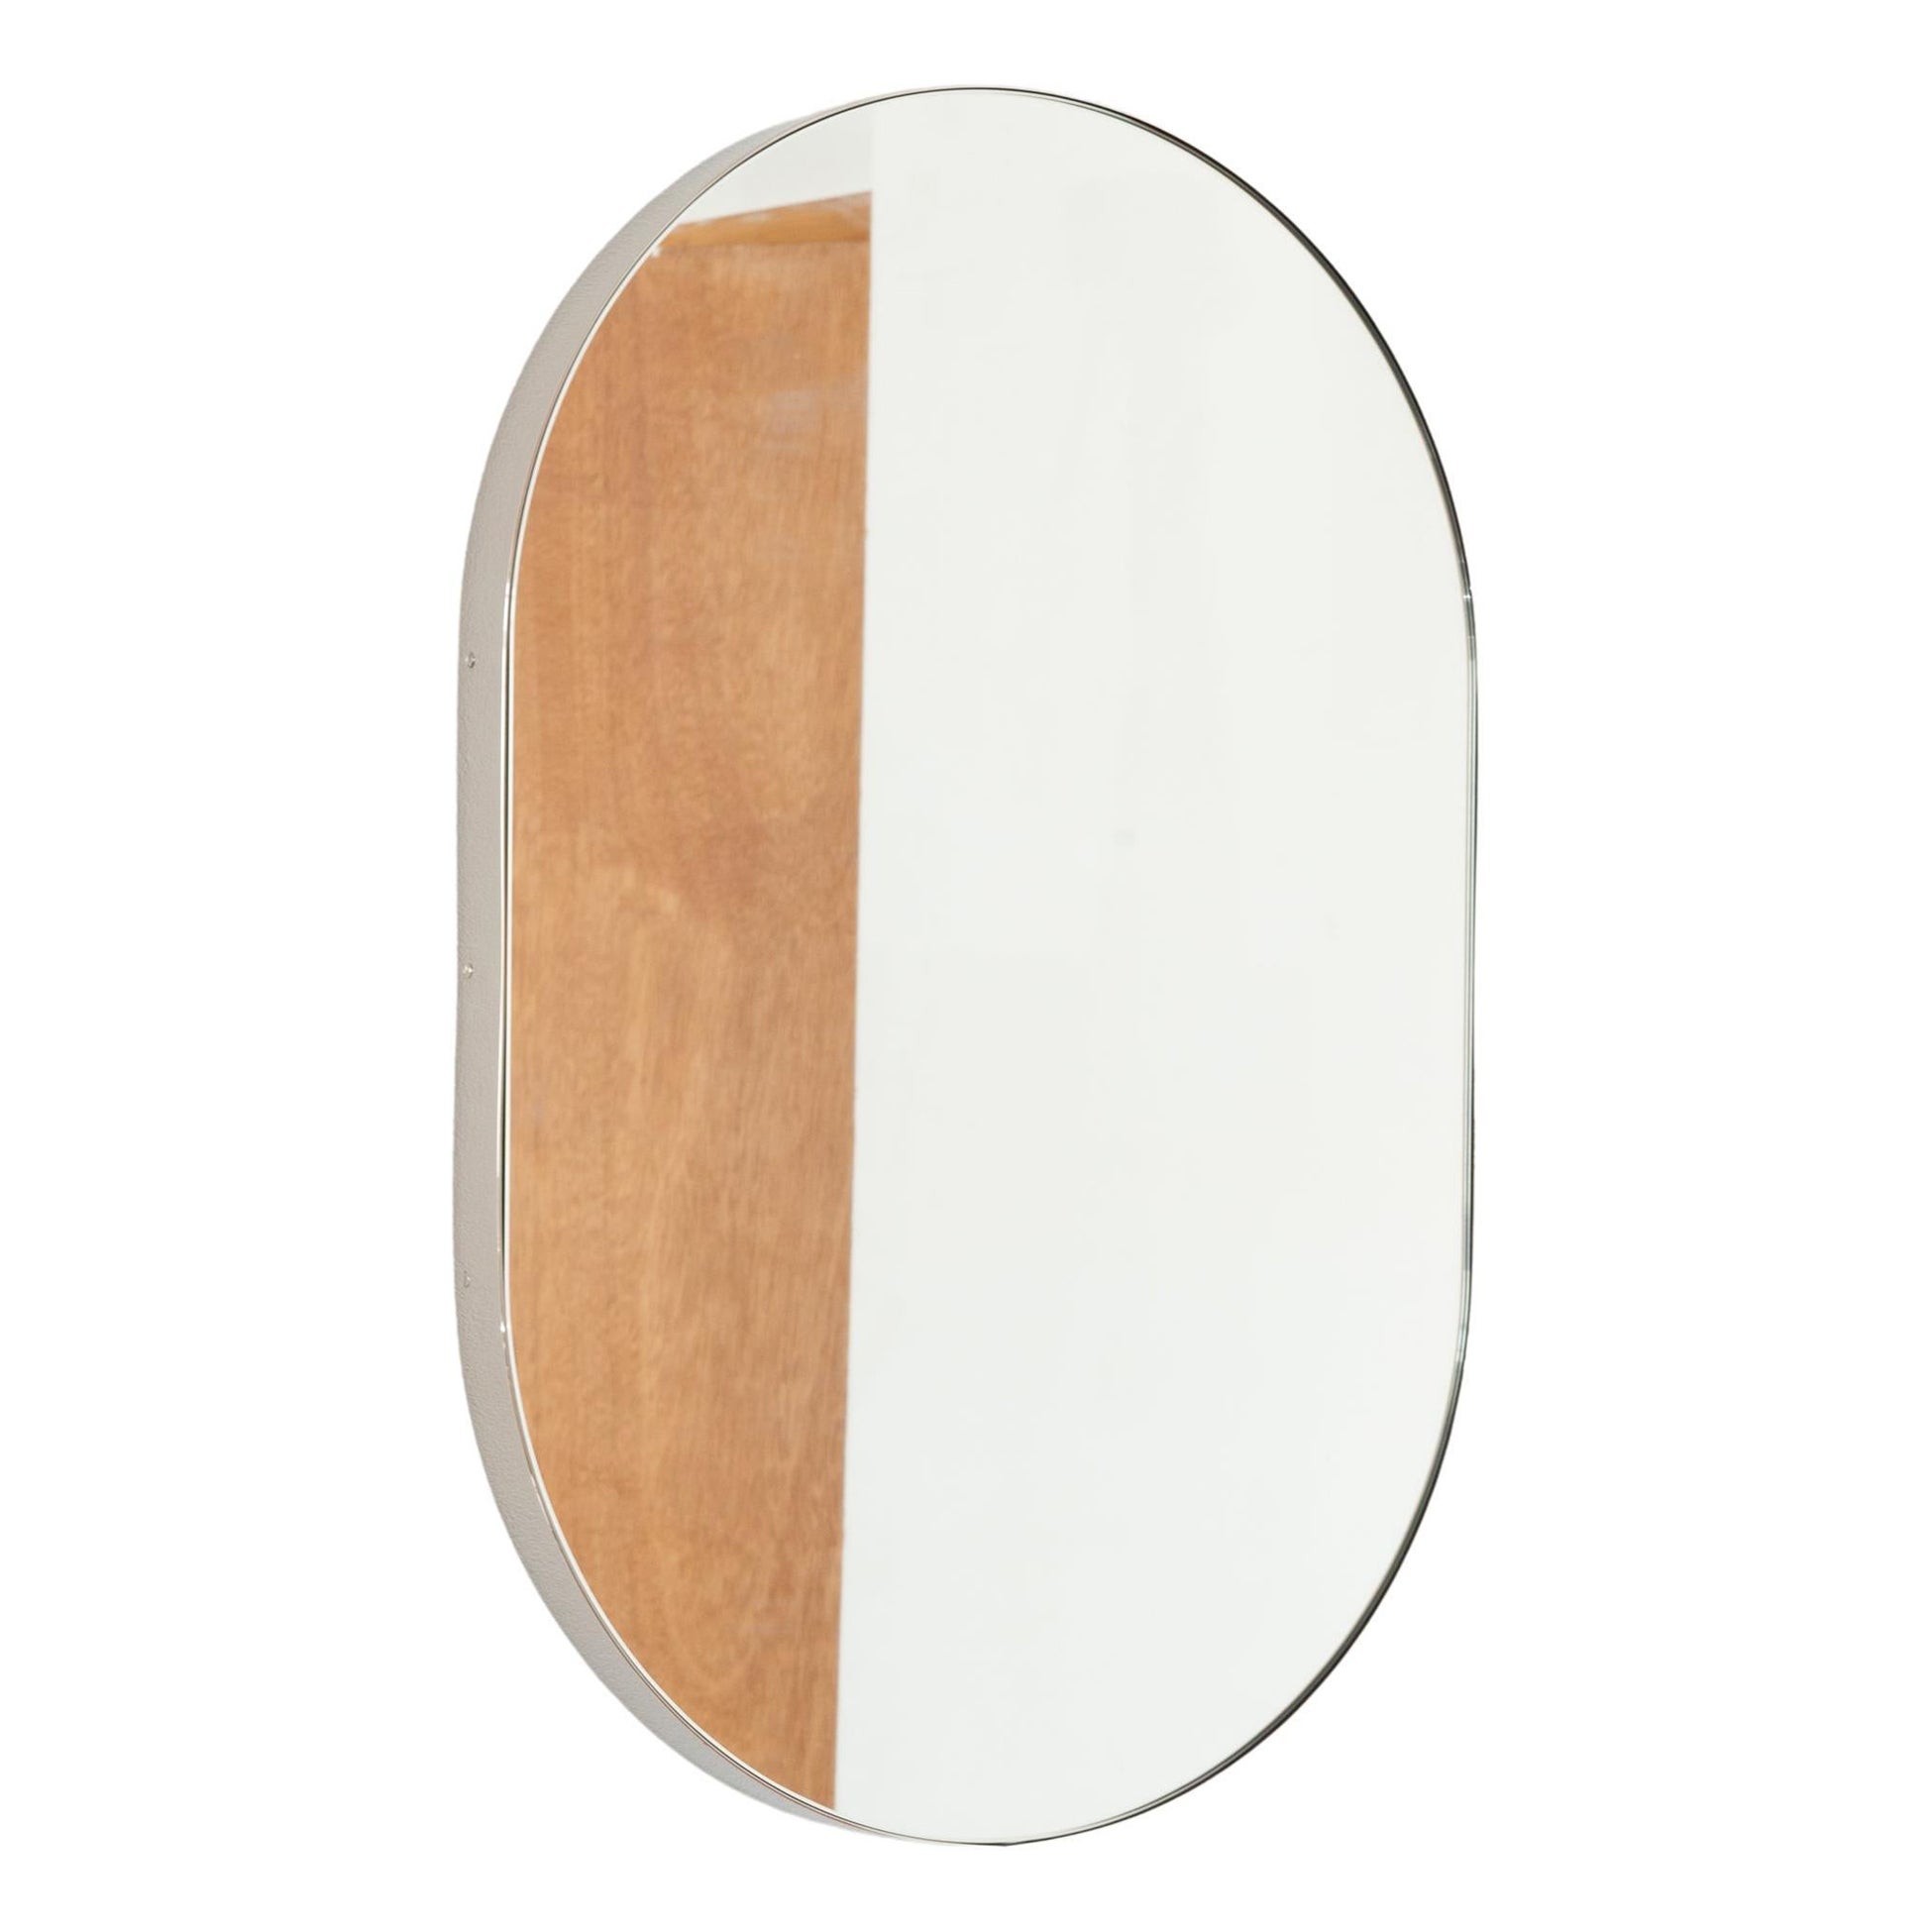 Capsula Pill Shaped Modern Bathroom Mirror with Nickel Plated Frame, XL